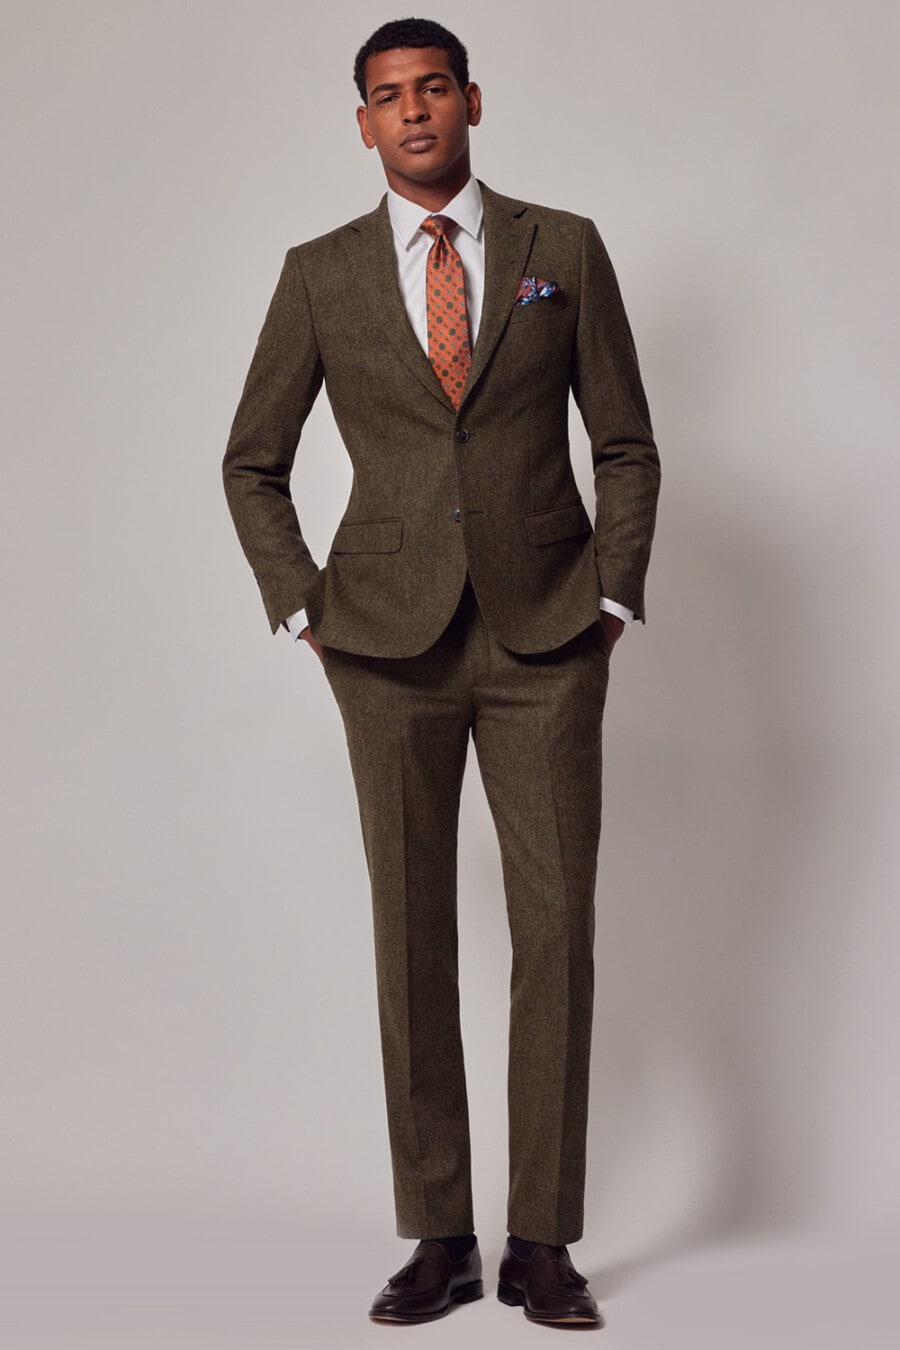 Men's green tweed suit, white shirt, orange tie and brown leather tassel loafers outfit